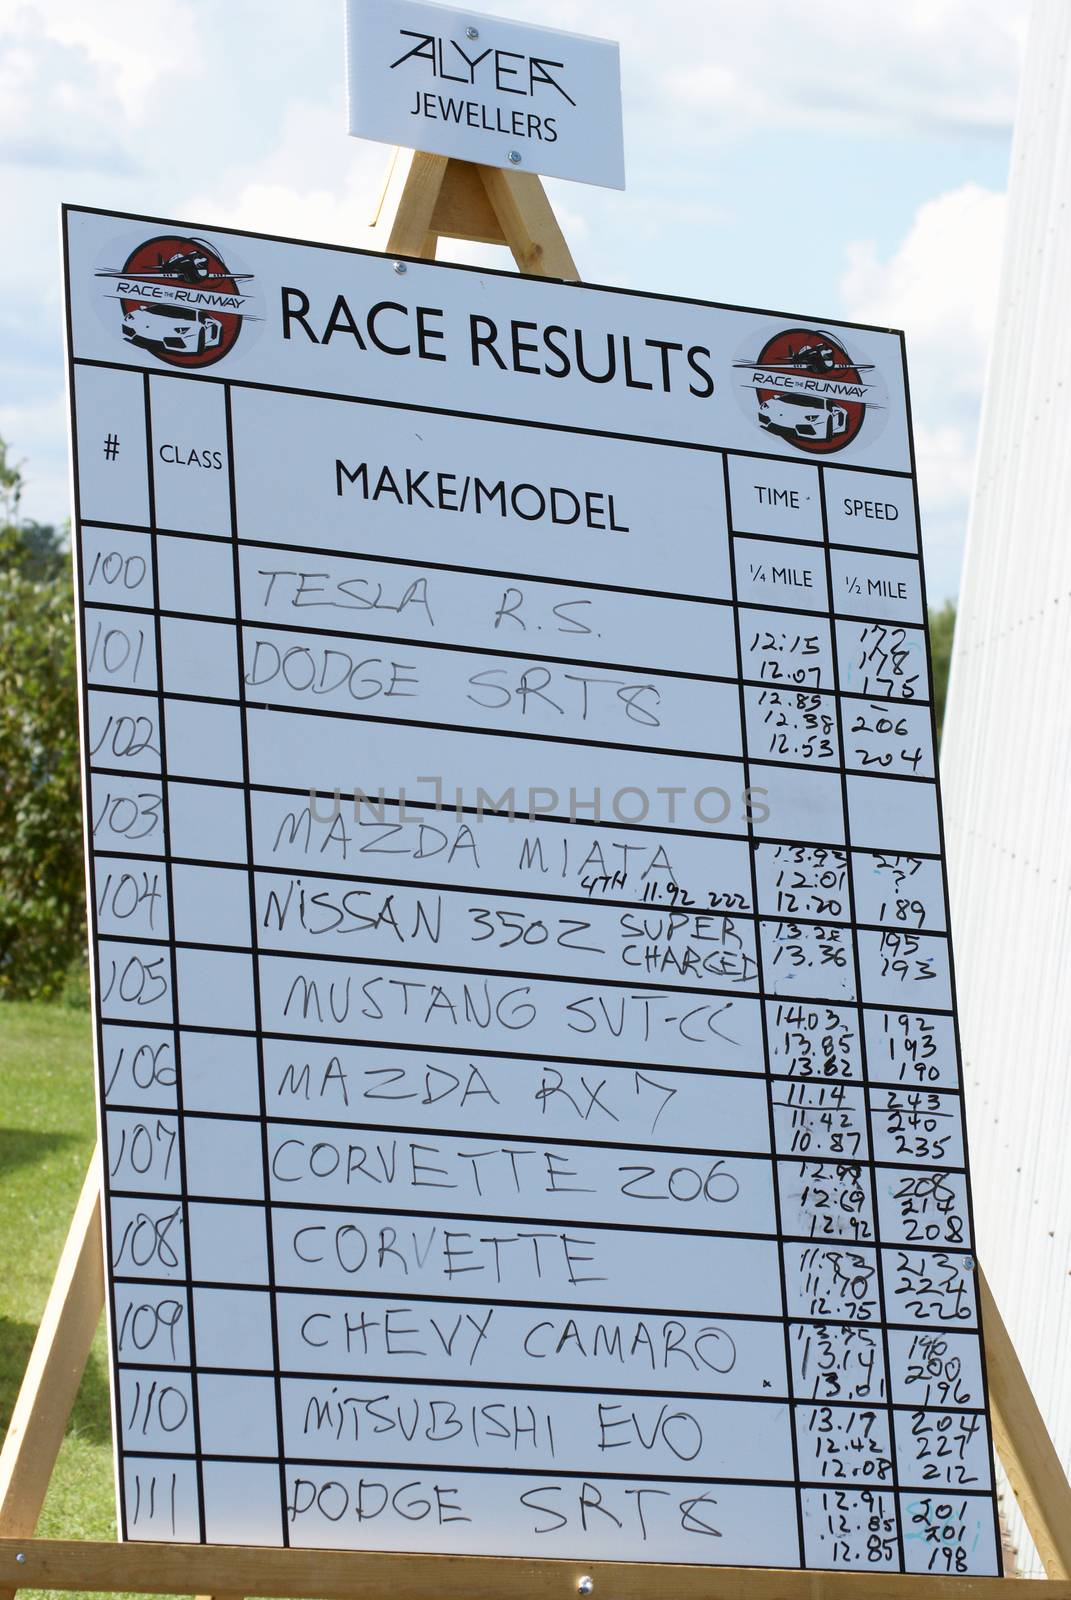 SMITHS FALLS, ON, CANADA - AUGUST 23, 2014.  Race results from the third annual Race the Runway event held at the Russ Beach Airport, in Smiths Falls, Ontario, Canada, on August 23, 2014.